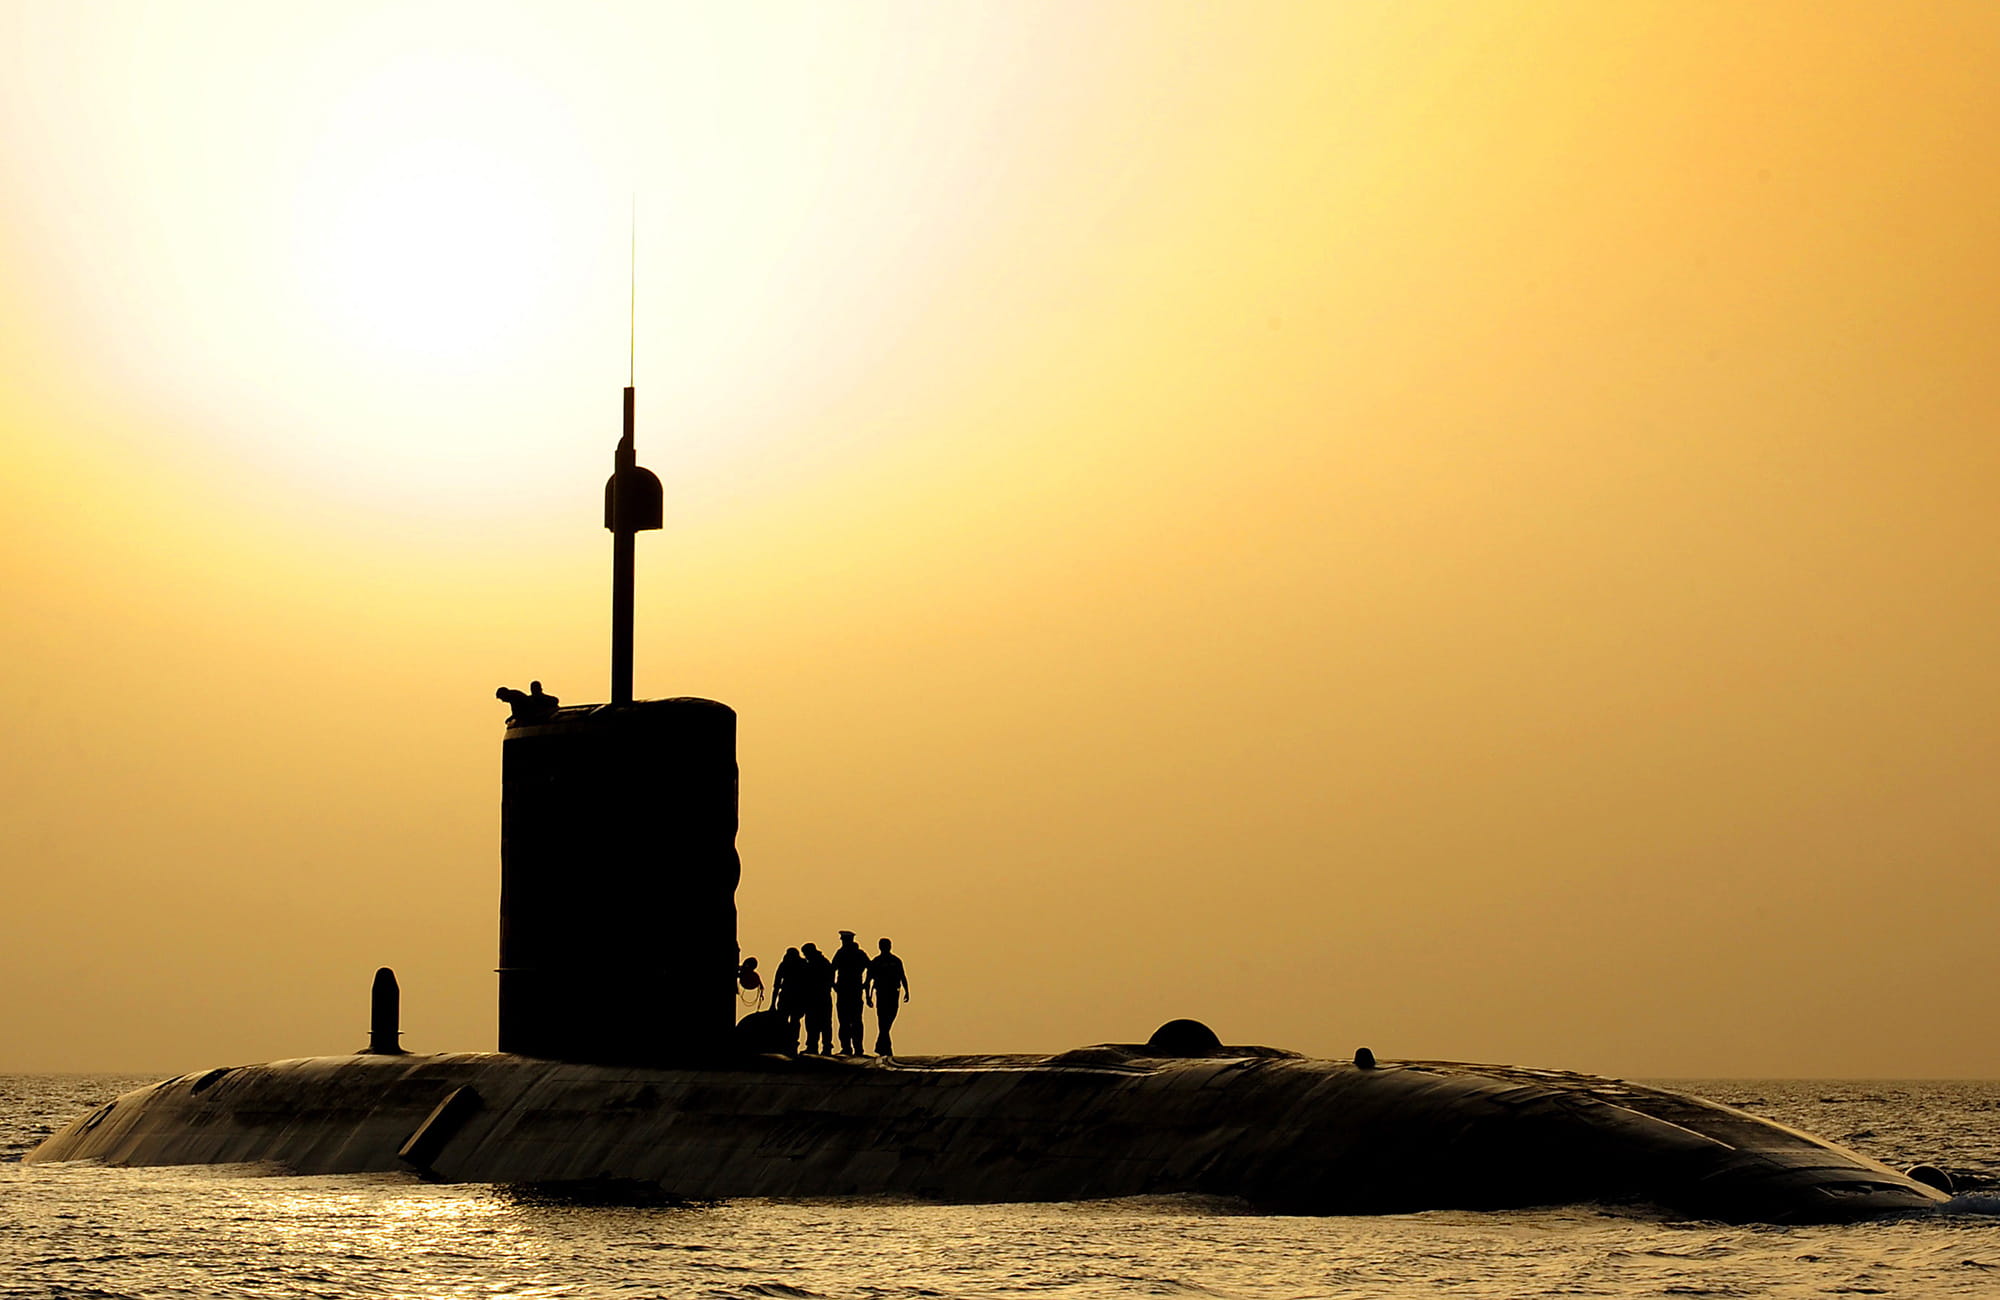 Silhouette of Royal Navy submarine at sunset with a yellow sky background